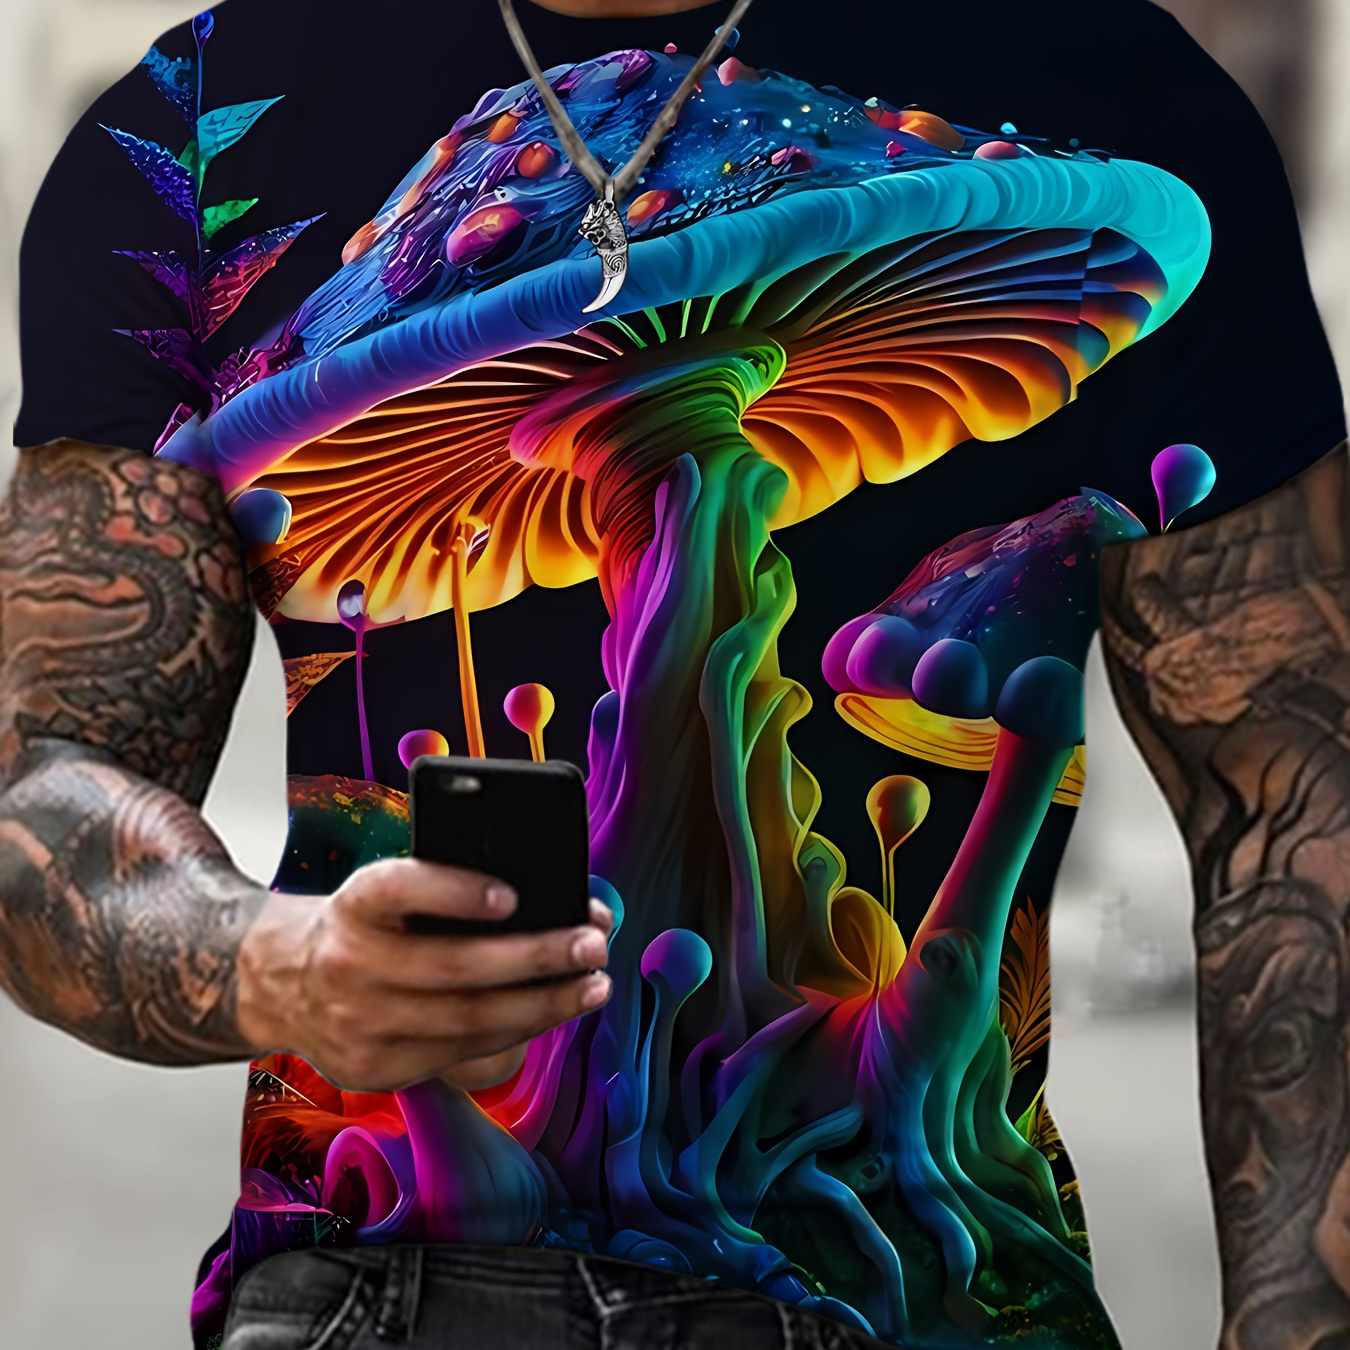 

Plus Size Men's Colorful Mushroom Graphic Print T-shirt For Summer, Trendy Casual Short Sleeve Tees